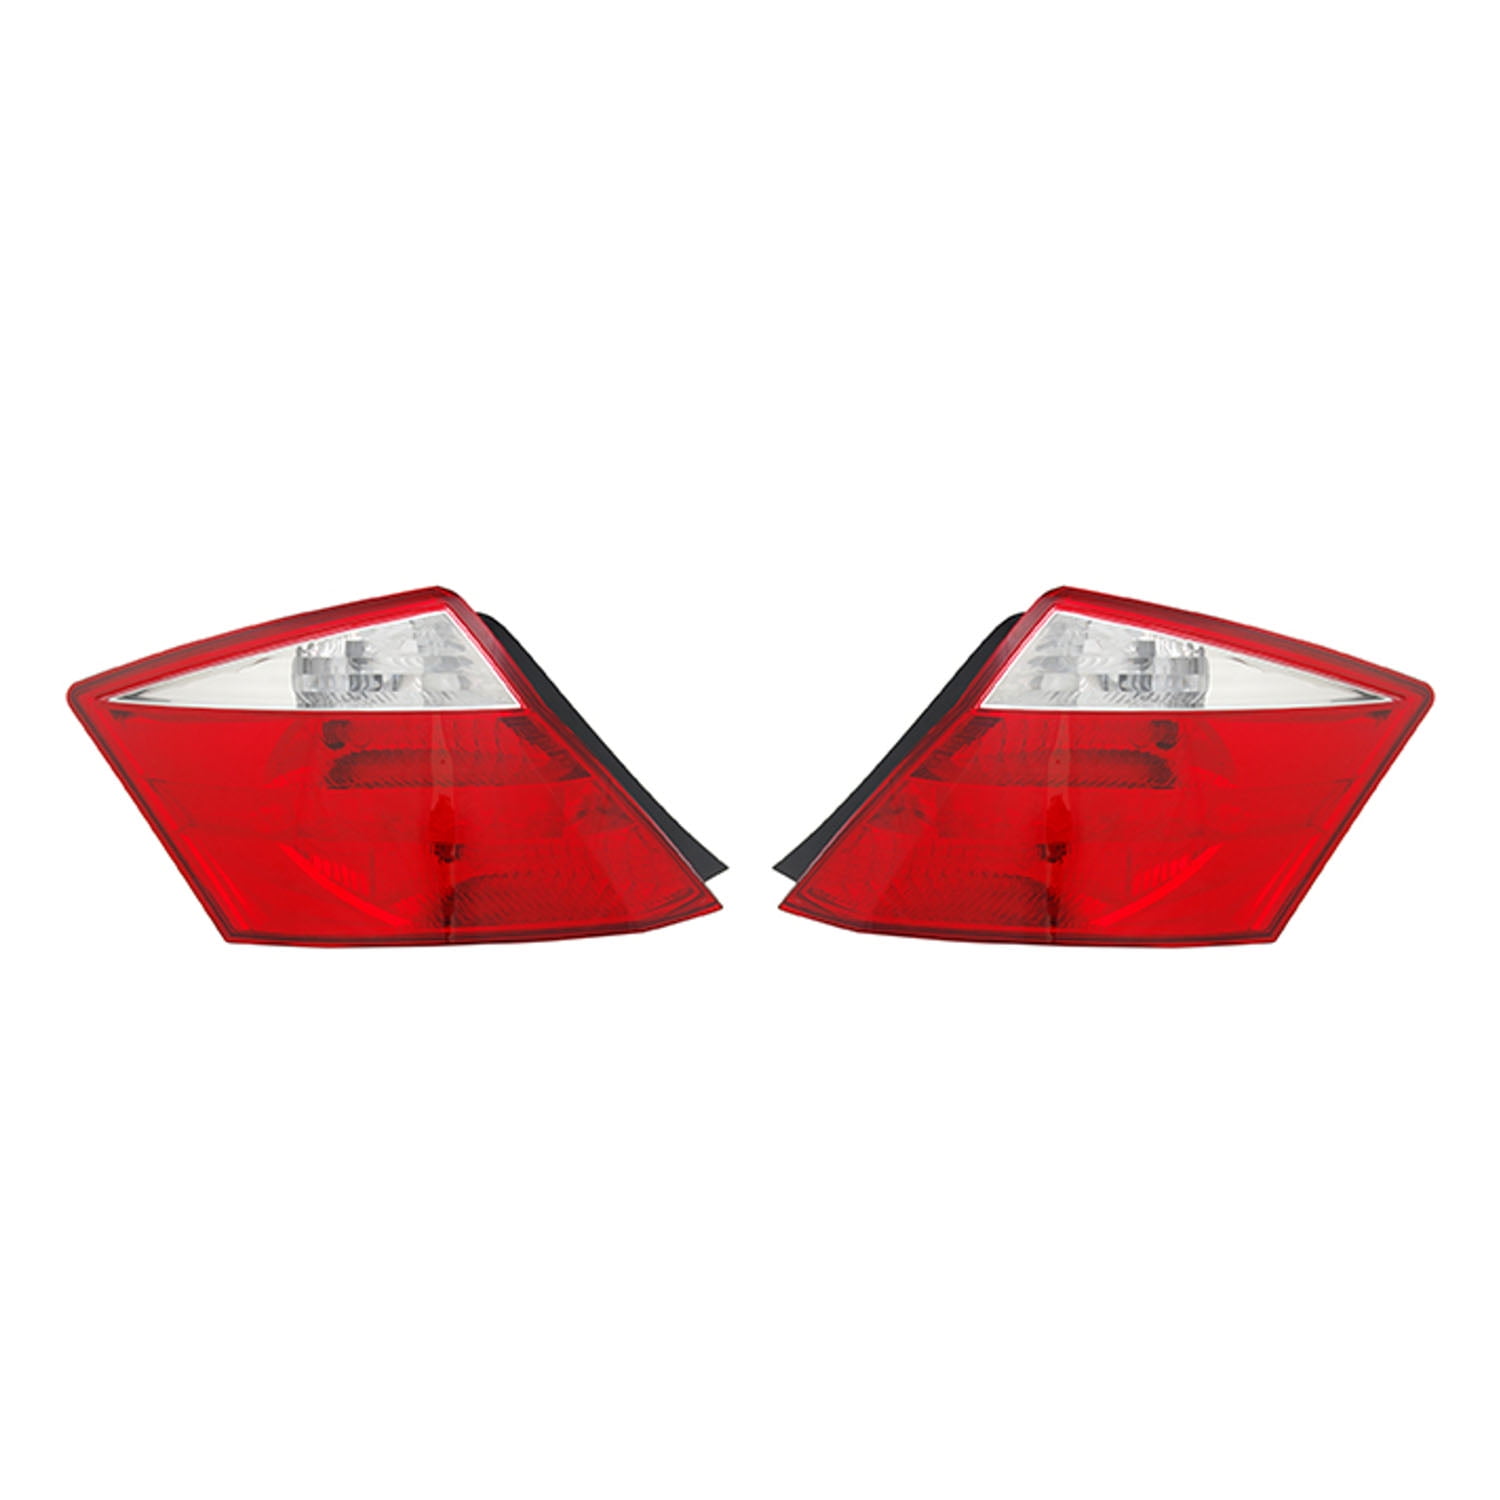 Taillights Taillamps Left & Right Pair Set for 08-10 Honda Accord 2 Door Coupe